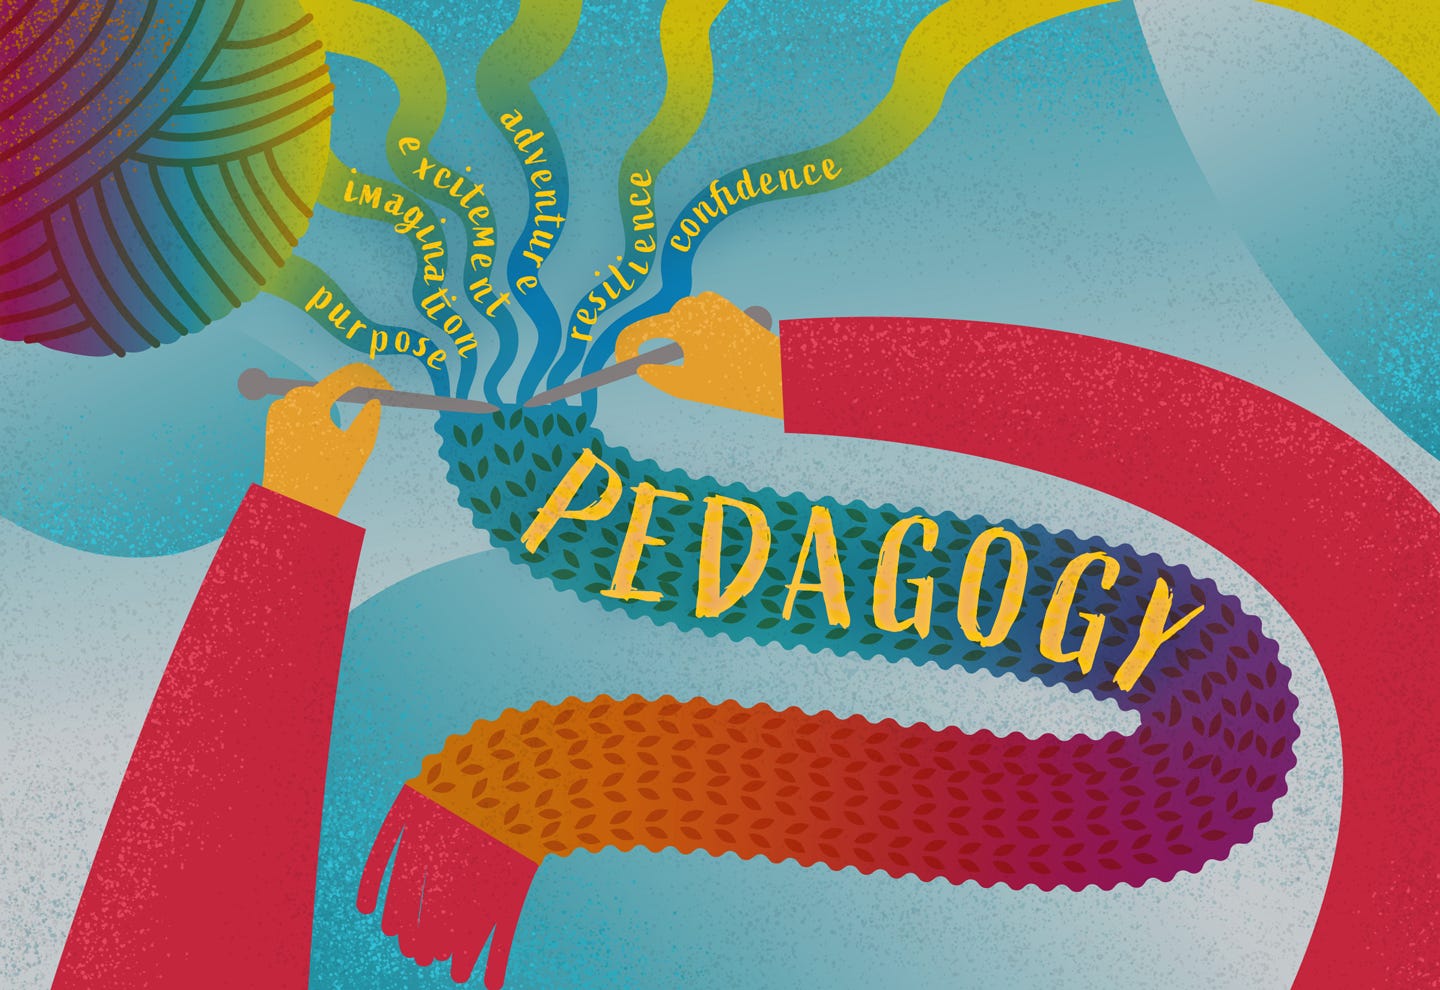 Pedagogy: is yours distinct from your curriculum? |